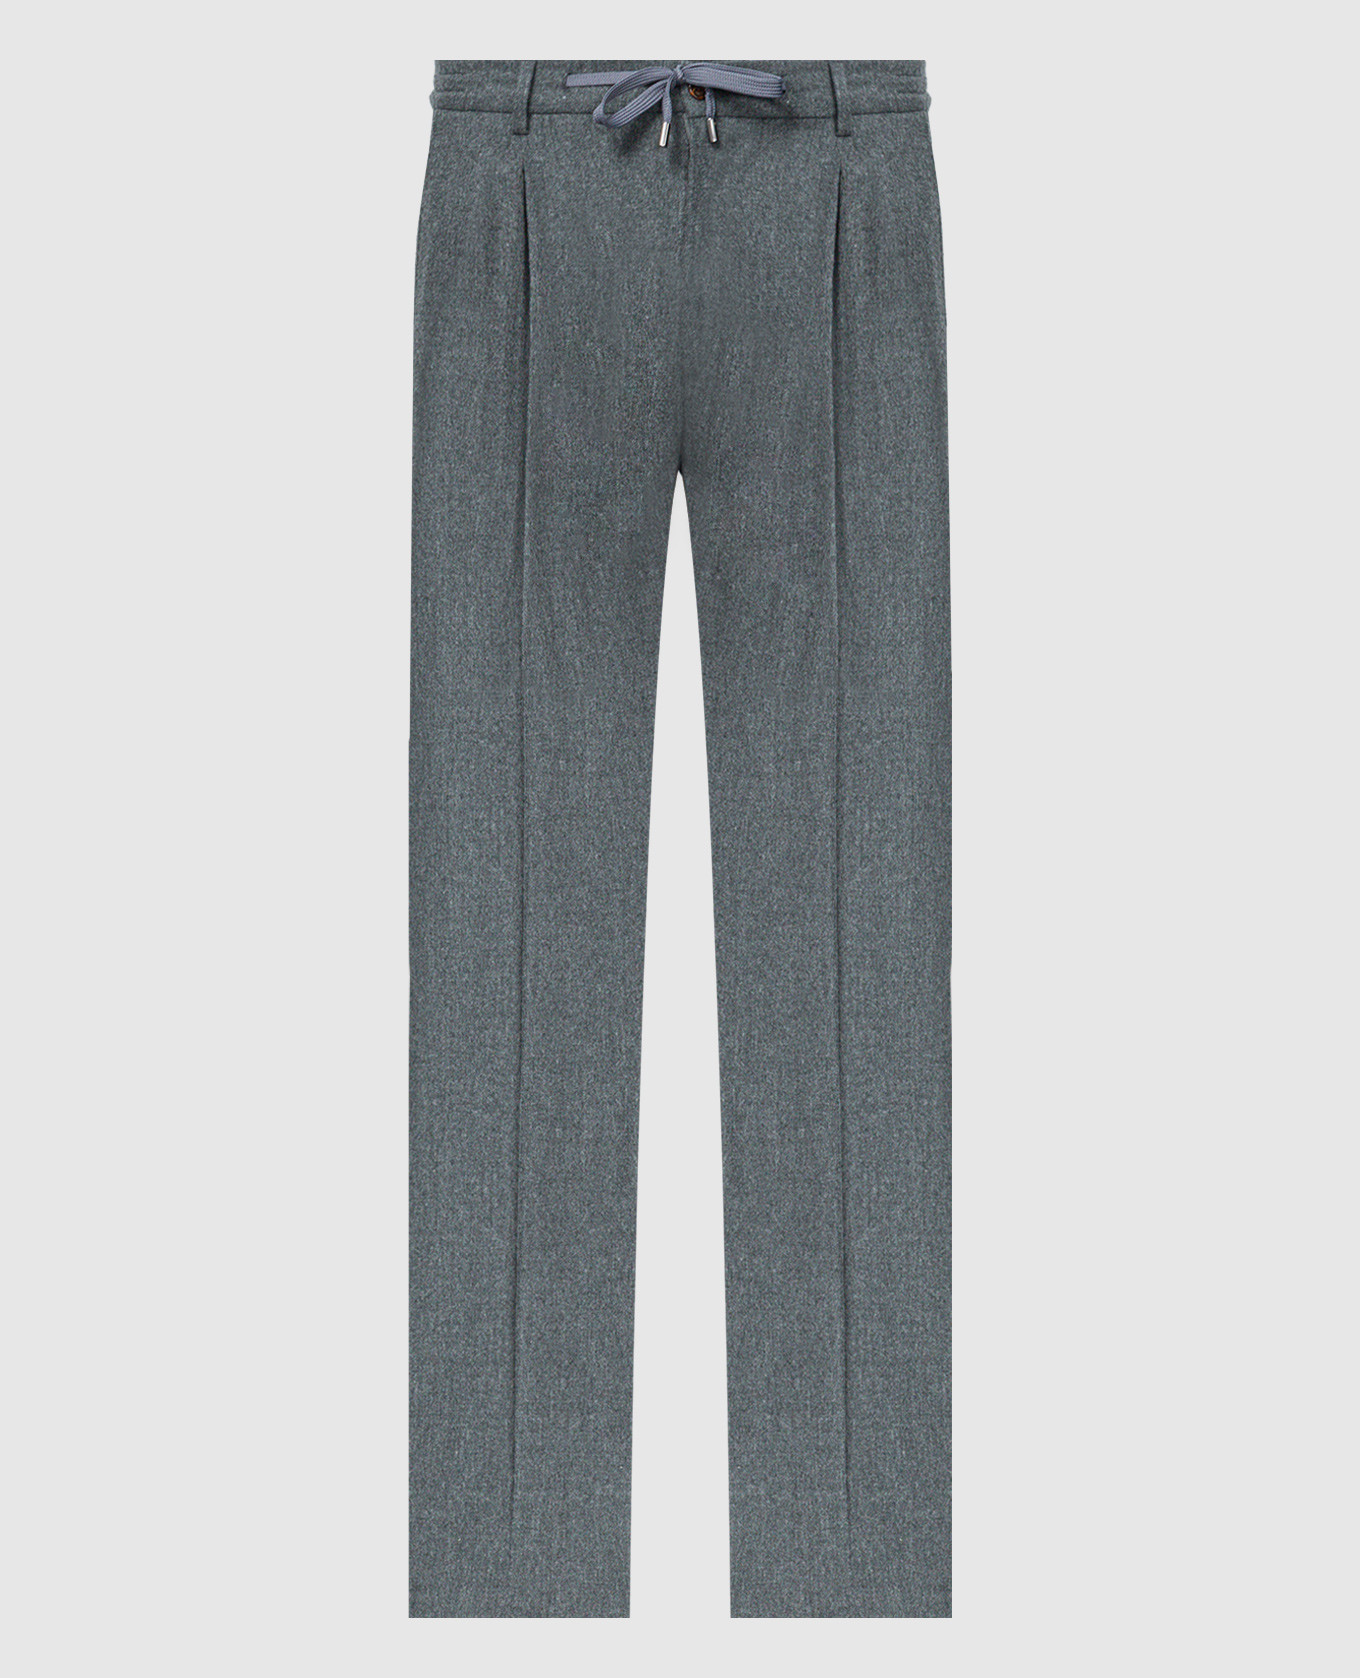 Anton-FSR gray wool and cashmere trousers